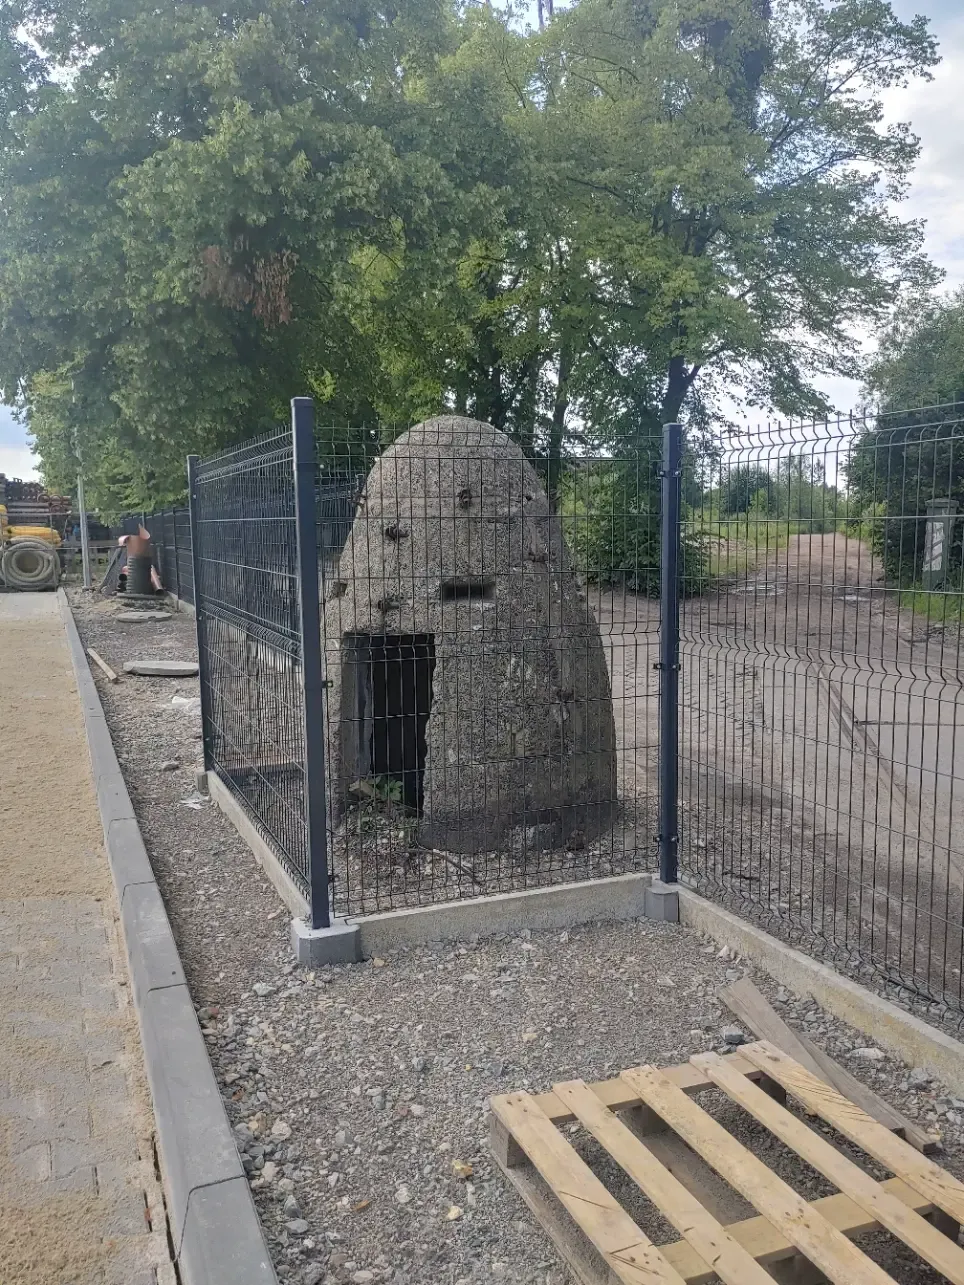 EIN-MANN BUNKER FROM WW2 IN 1:1 SCALE (FROM GLIWICE)